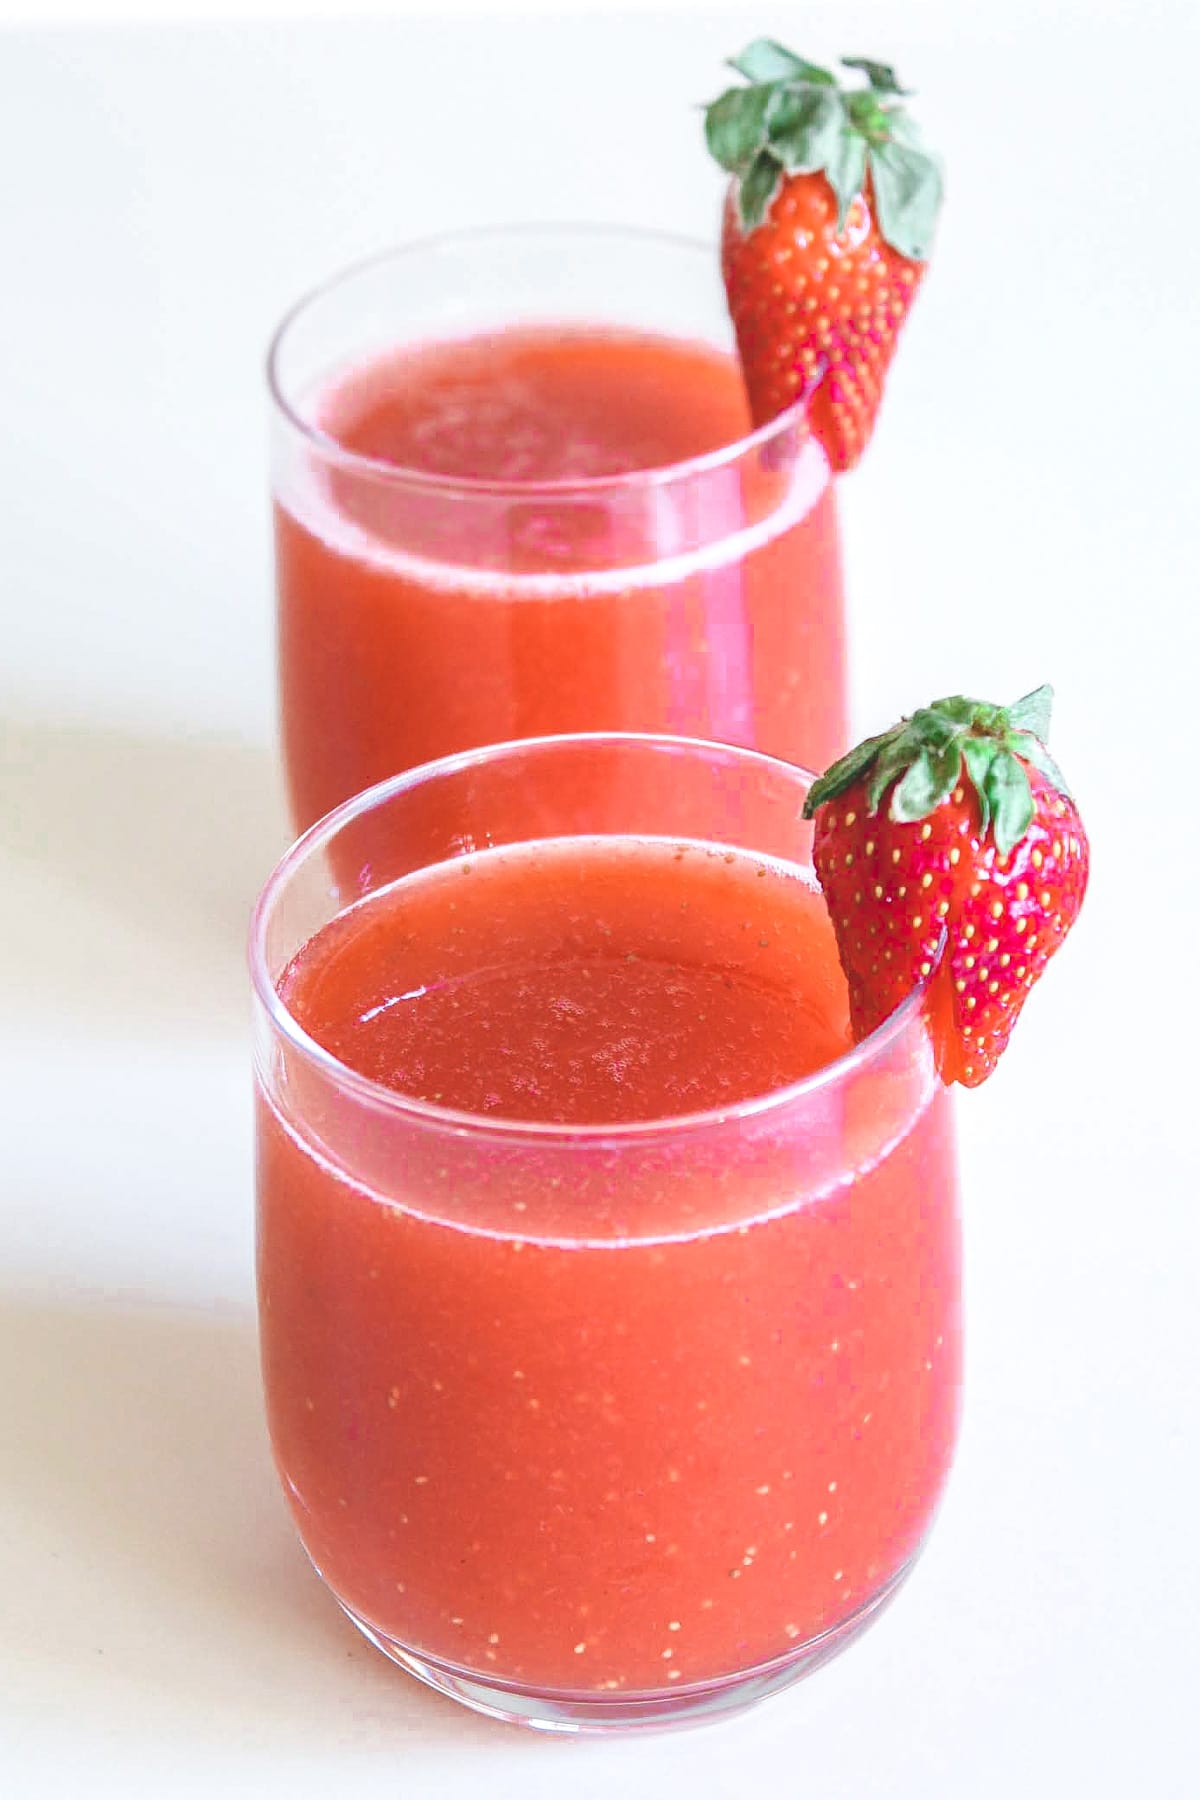 2 glasses of strawberry juice garnished with a whole strawberry.